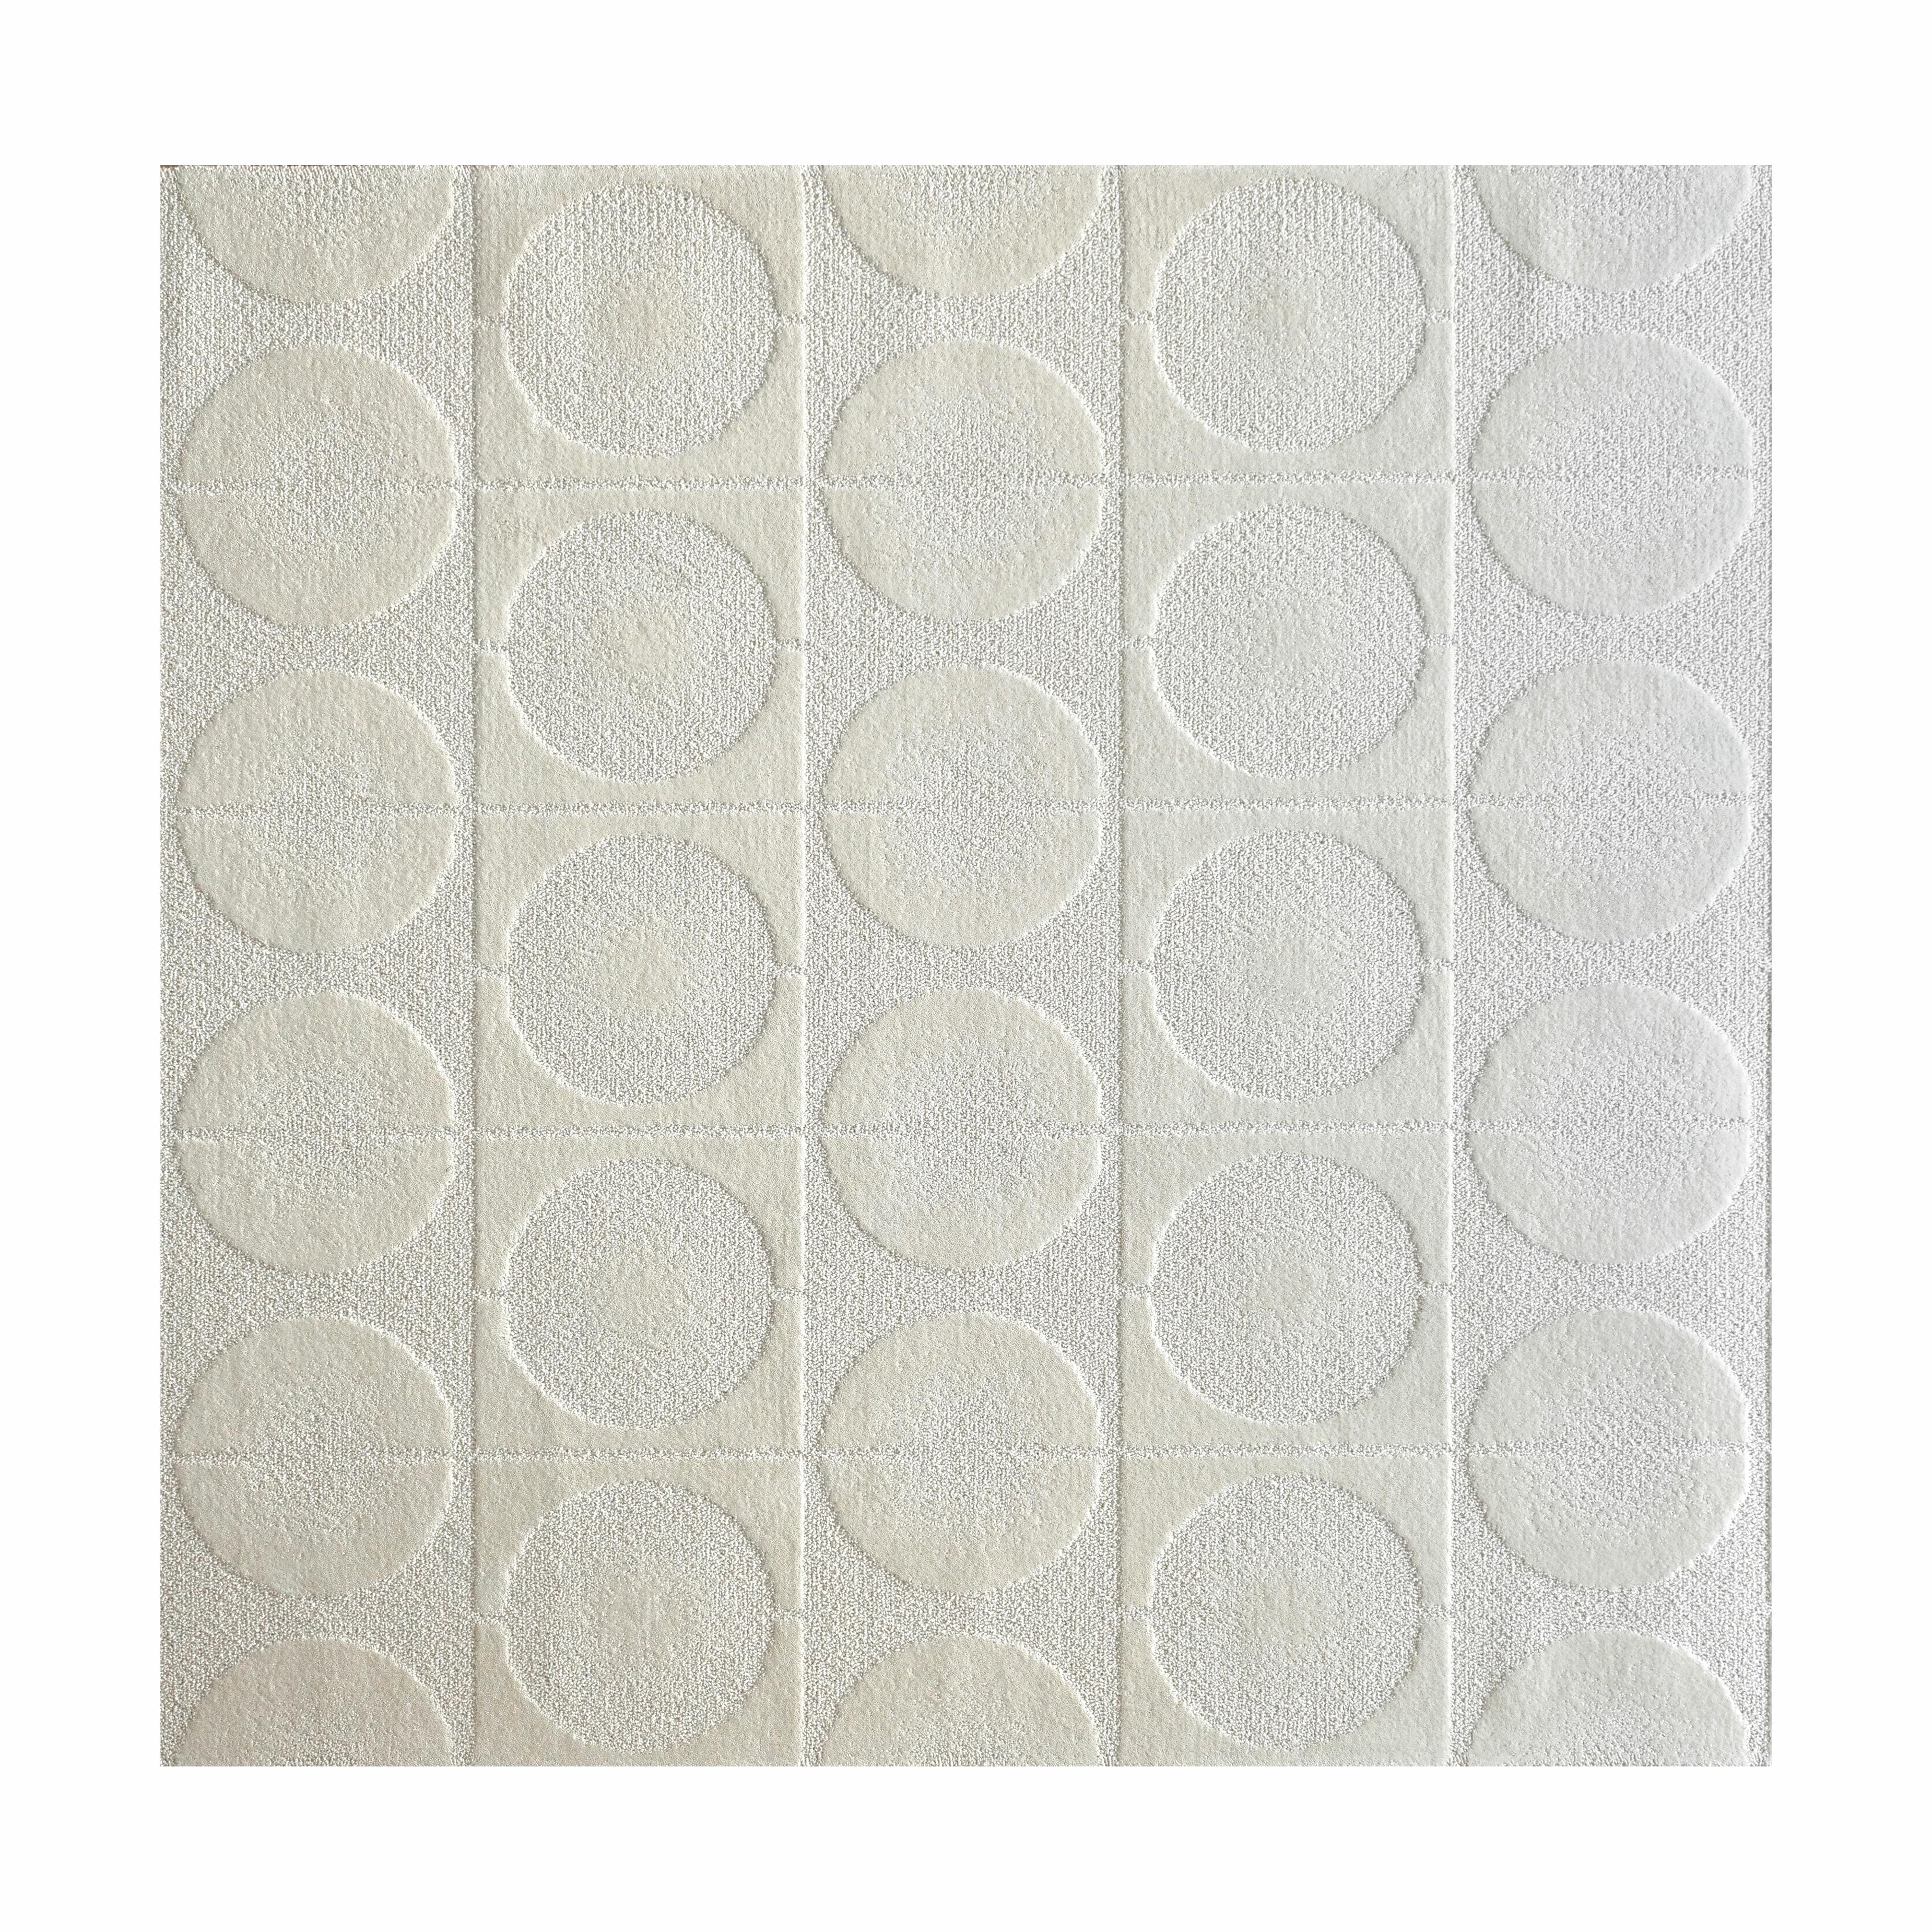 Rug designed by Finn Juhl in 1963, relaunched in 2015.
Manufactured by House of Finn Juhl in Denmark.

In 1963, Finn Juhl designed a series of characteristic circle patterns for the Danish company Vittrup Tæpper (Vittrup Rugs). However, the rugs